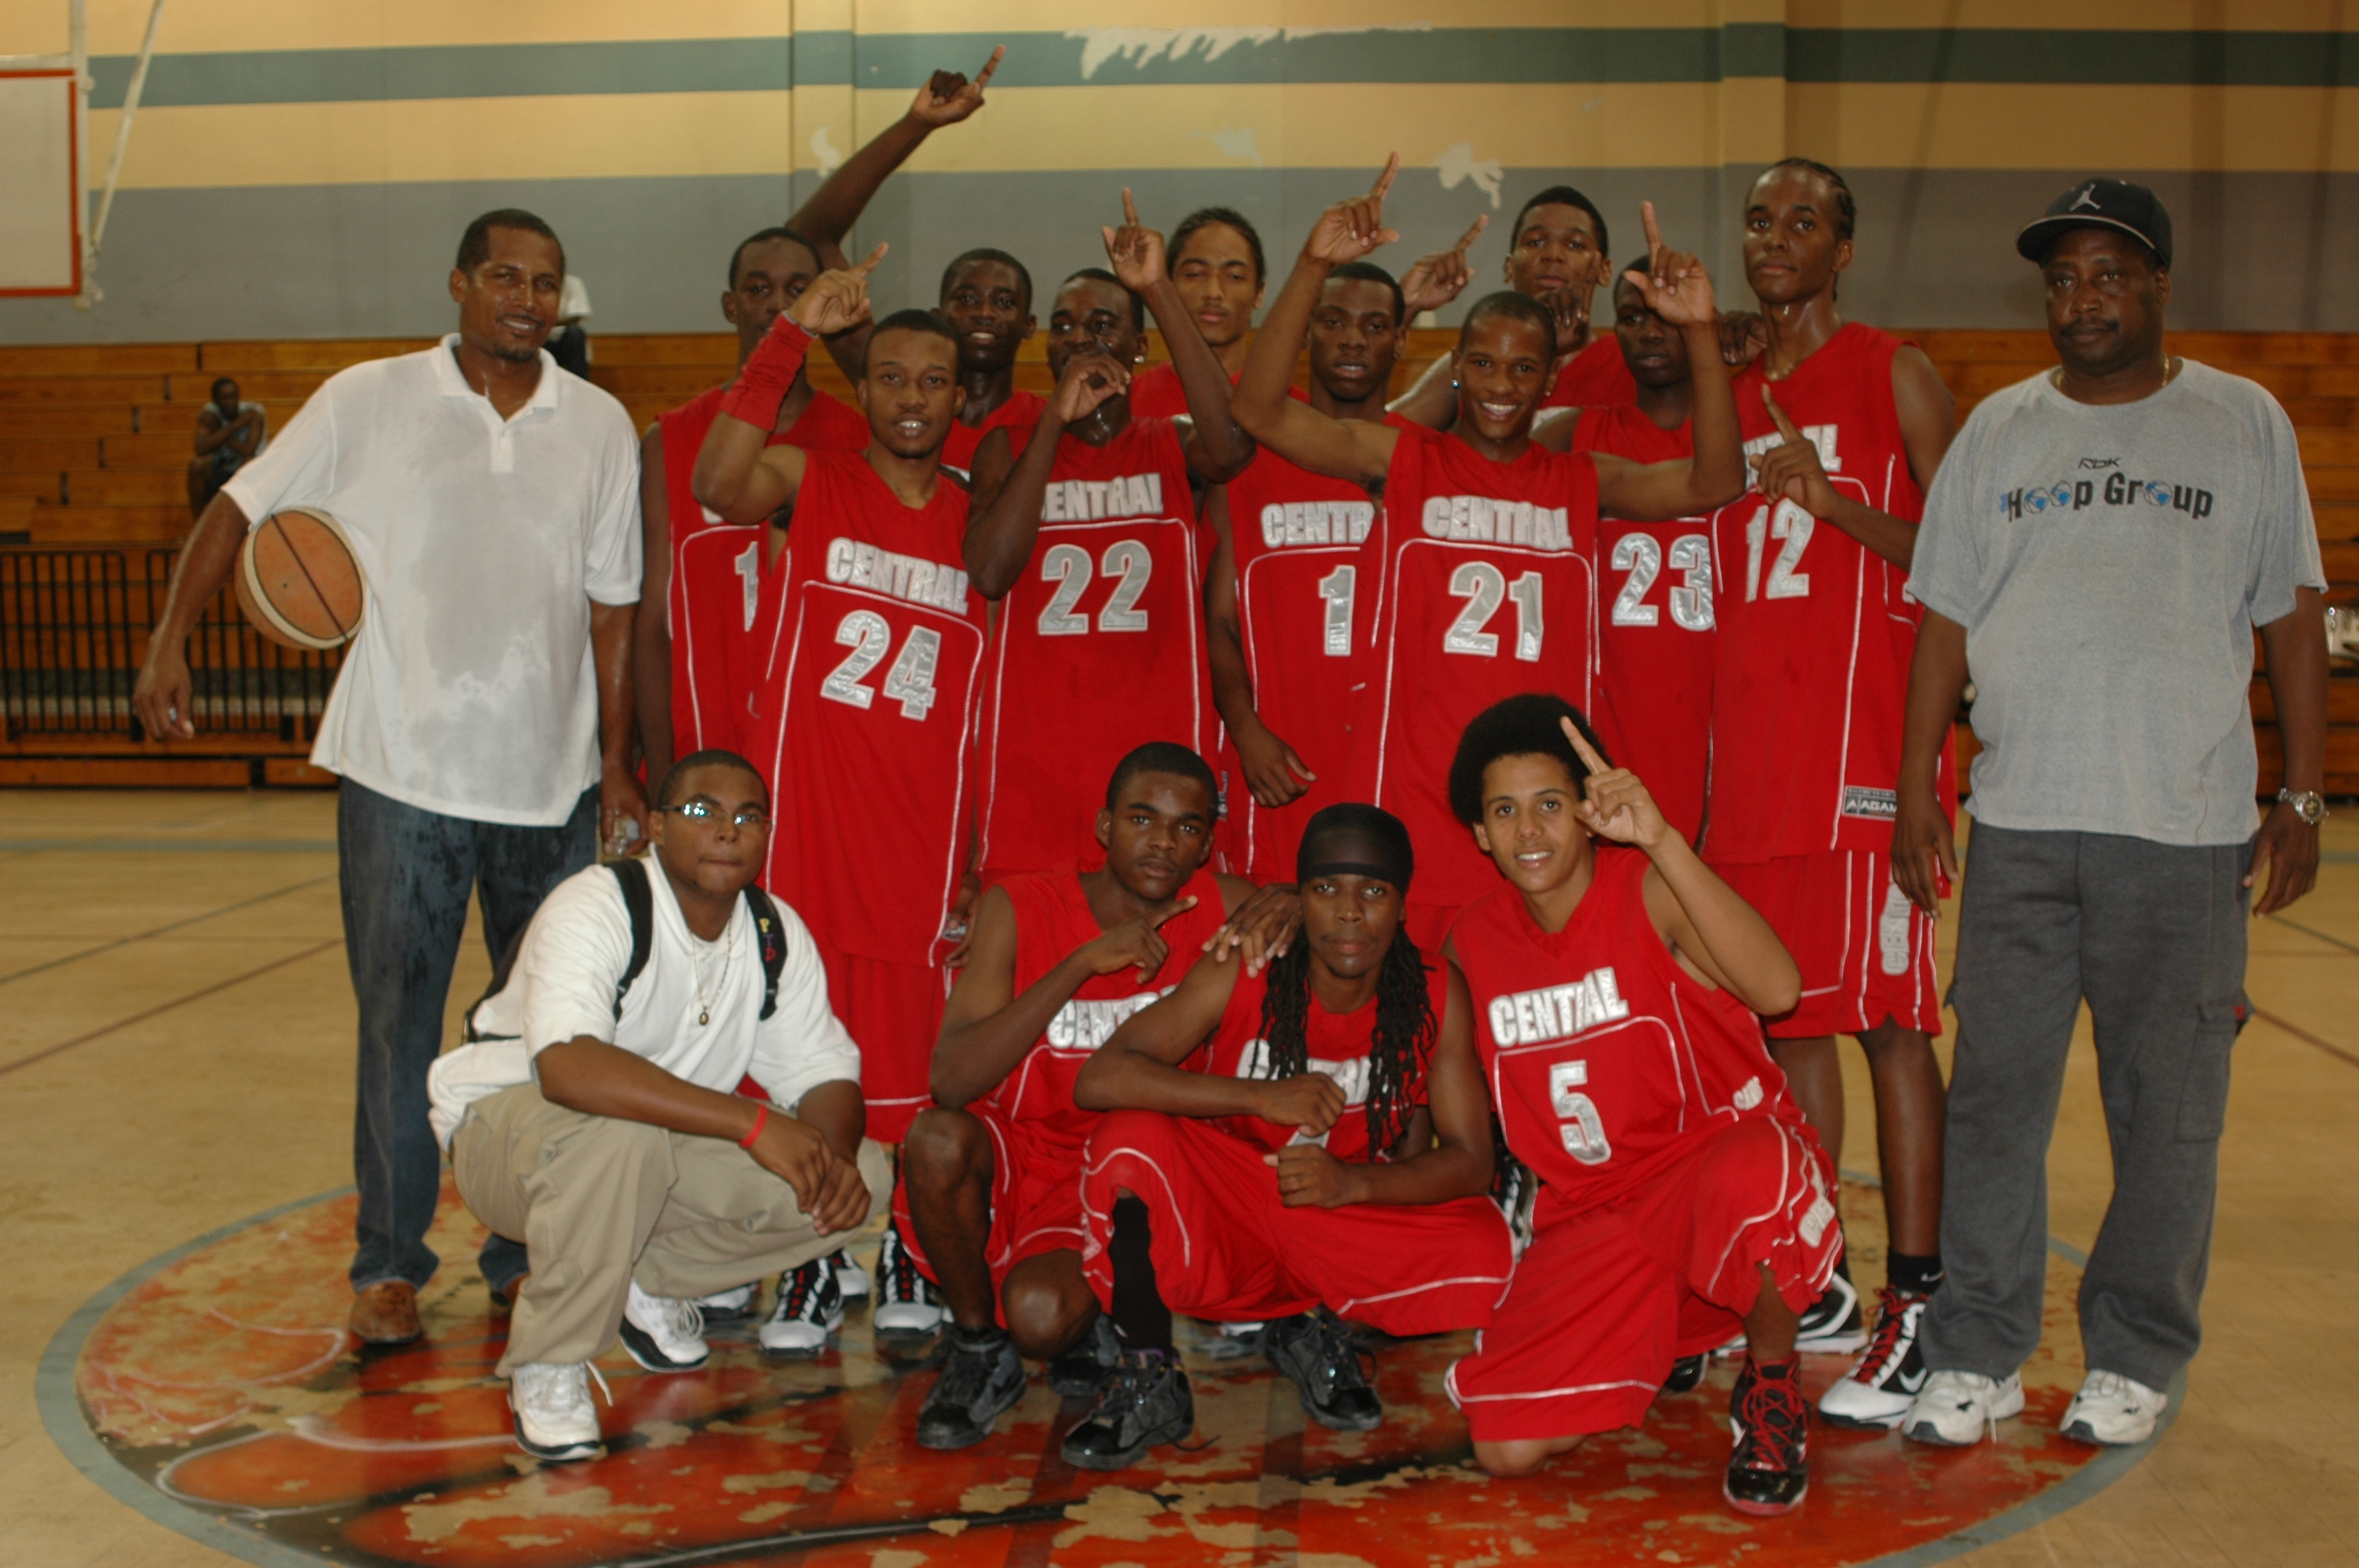 The Caribs boys strike a winning pose after defeating the Barras.